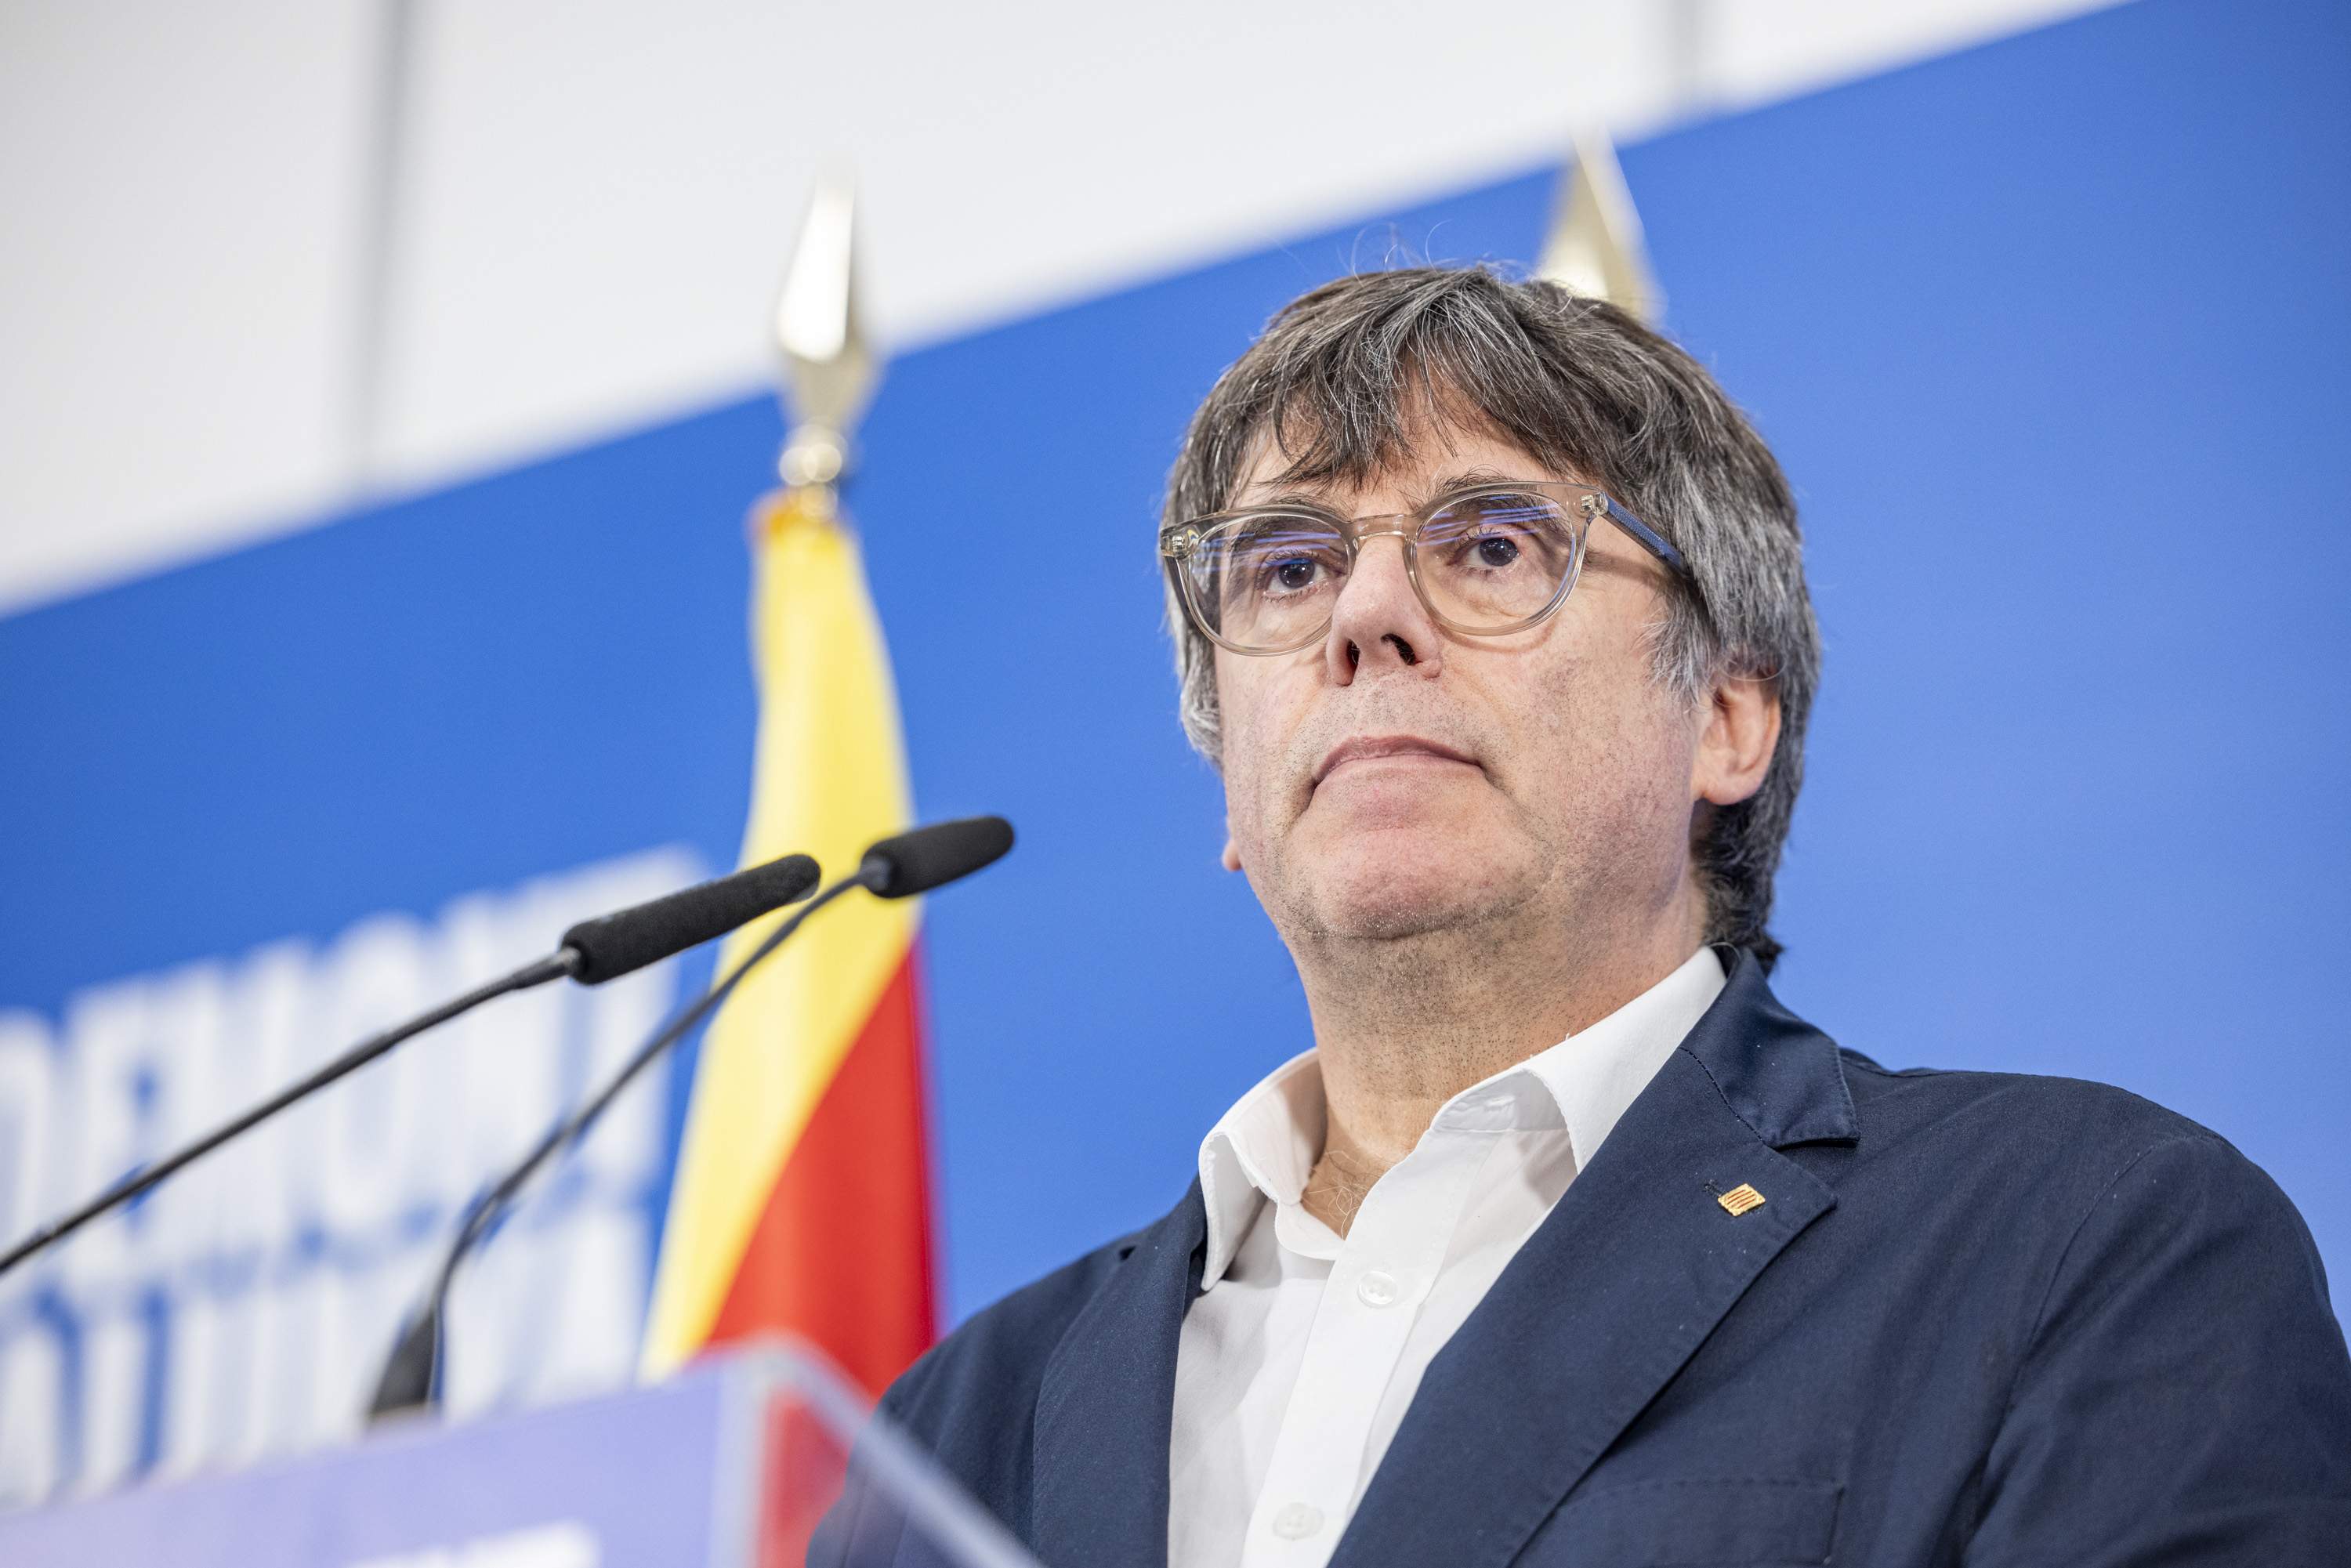 'No' to an amnesty:  Judge Llarena maintains arrest warrant for Puigdemont over misuse of funds